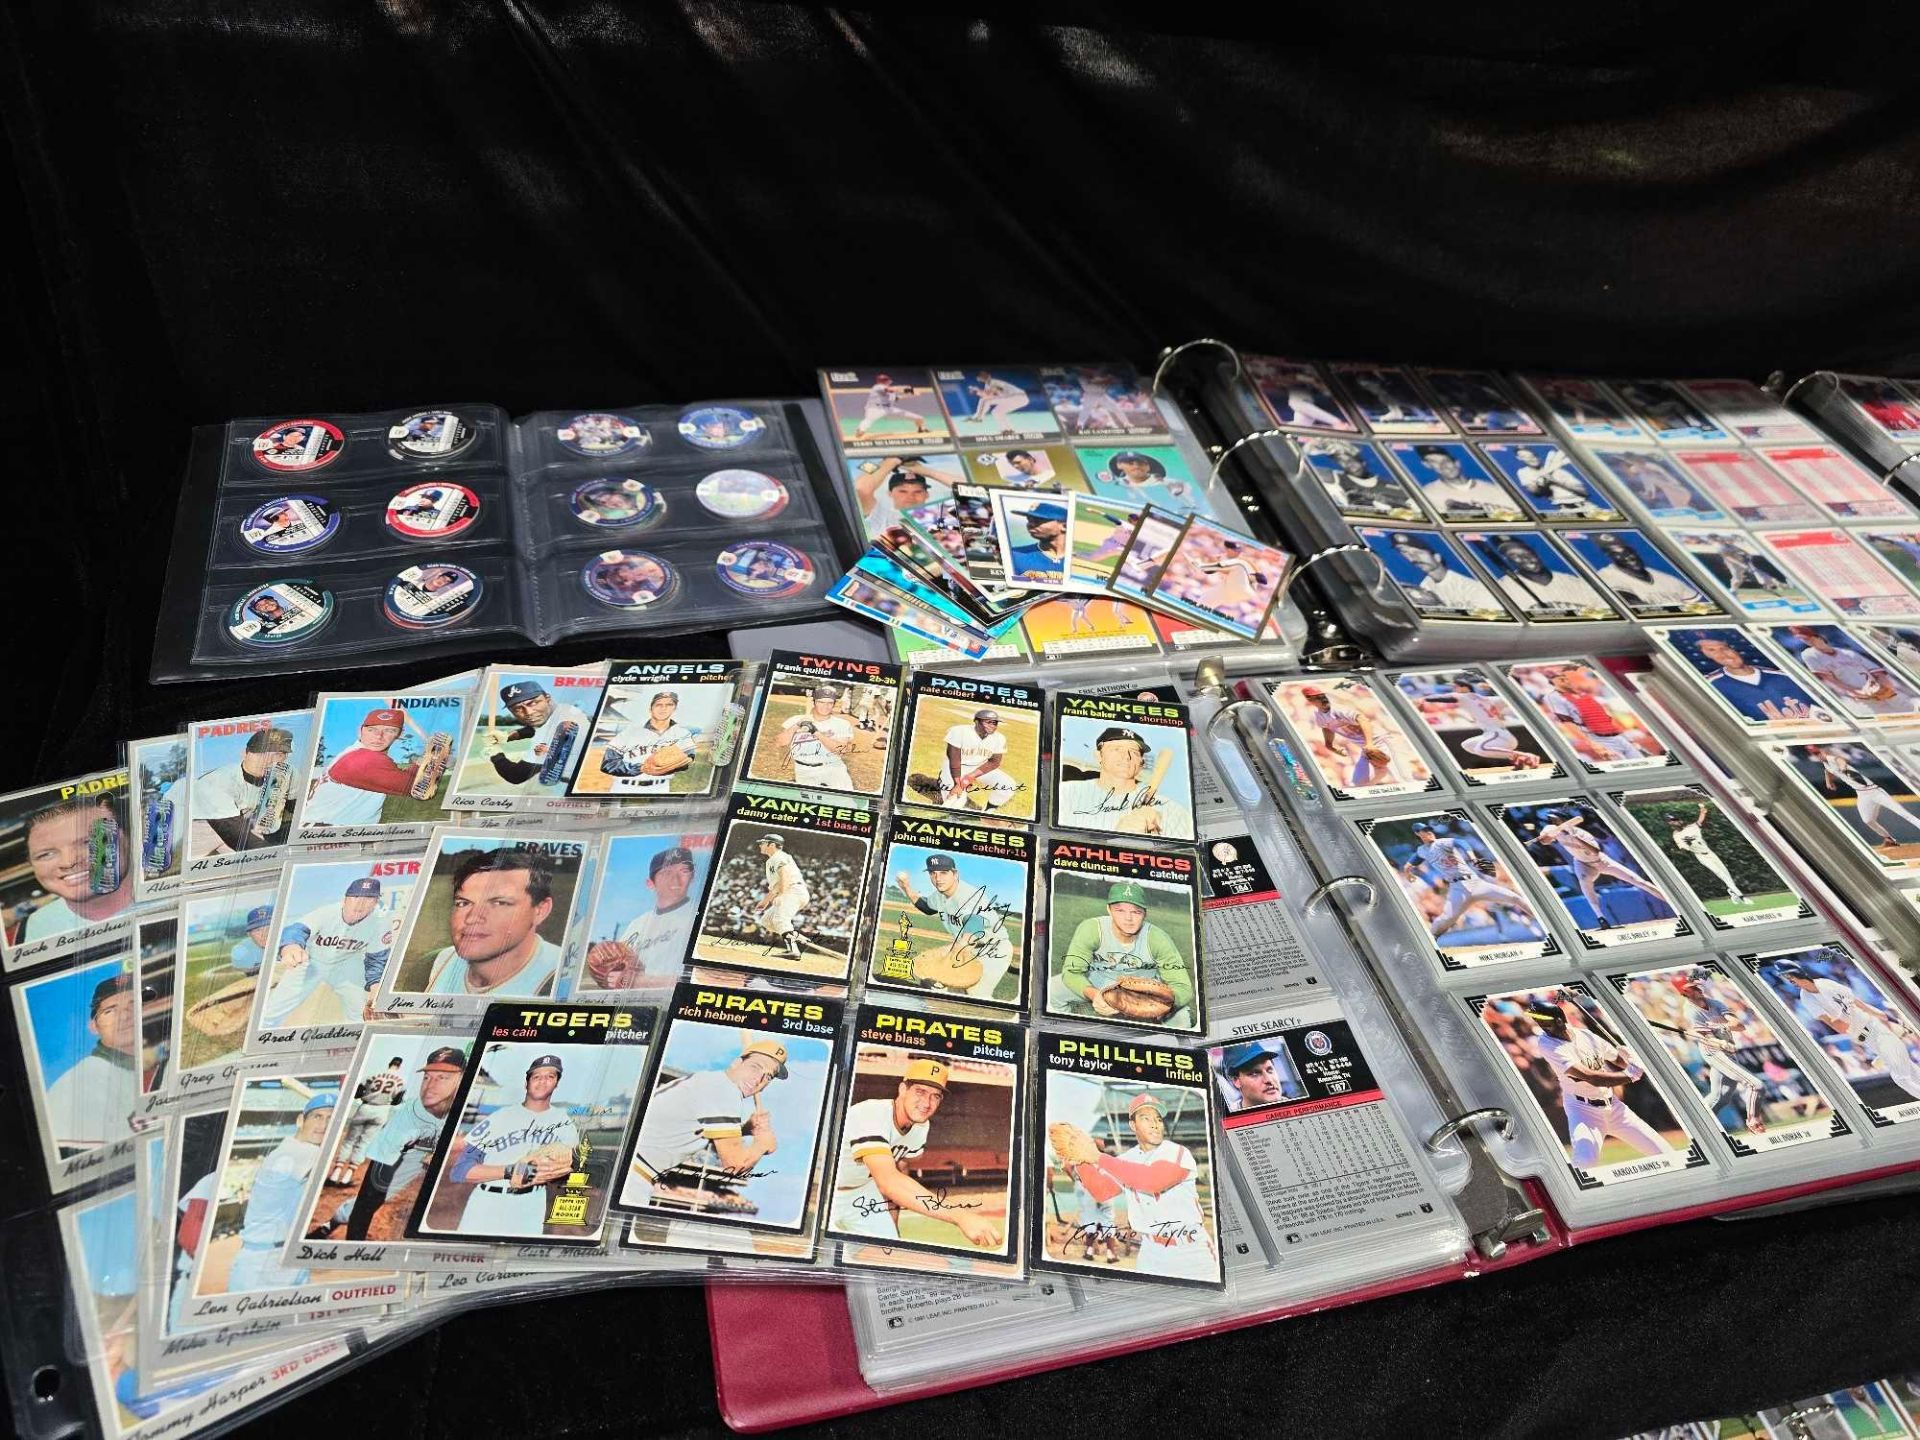 large lot of baseball cards most of them in binders and sleeves and 7-Eleven vintage baseball items - Image 2 of 7